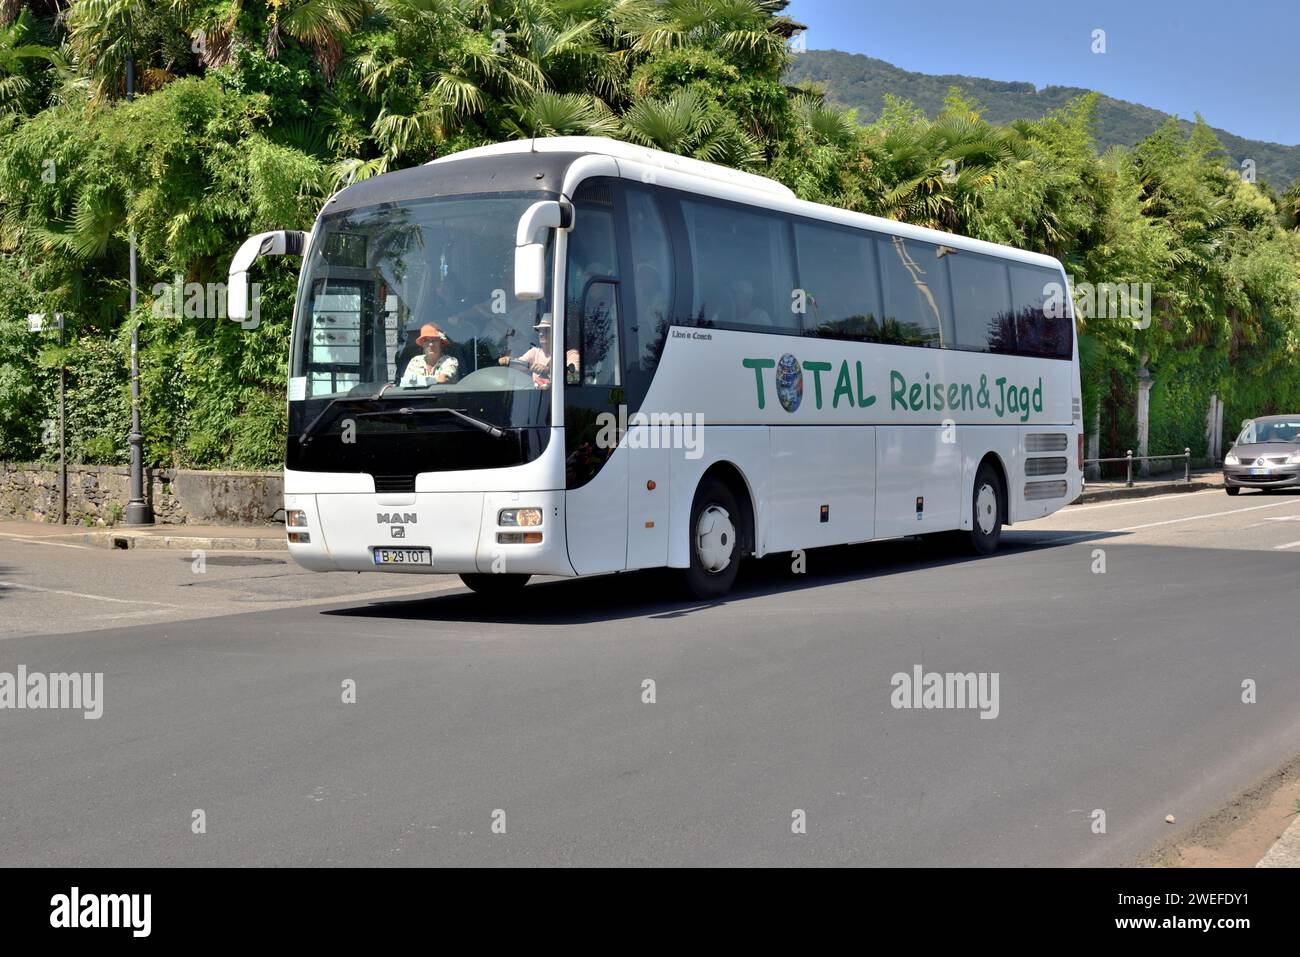 A MAN Lion's Coach operated by Romanian company Total Reisen & Jagd is seen in Stresa, Italy. Stock Photo